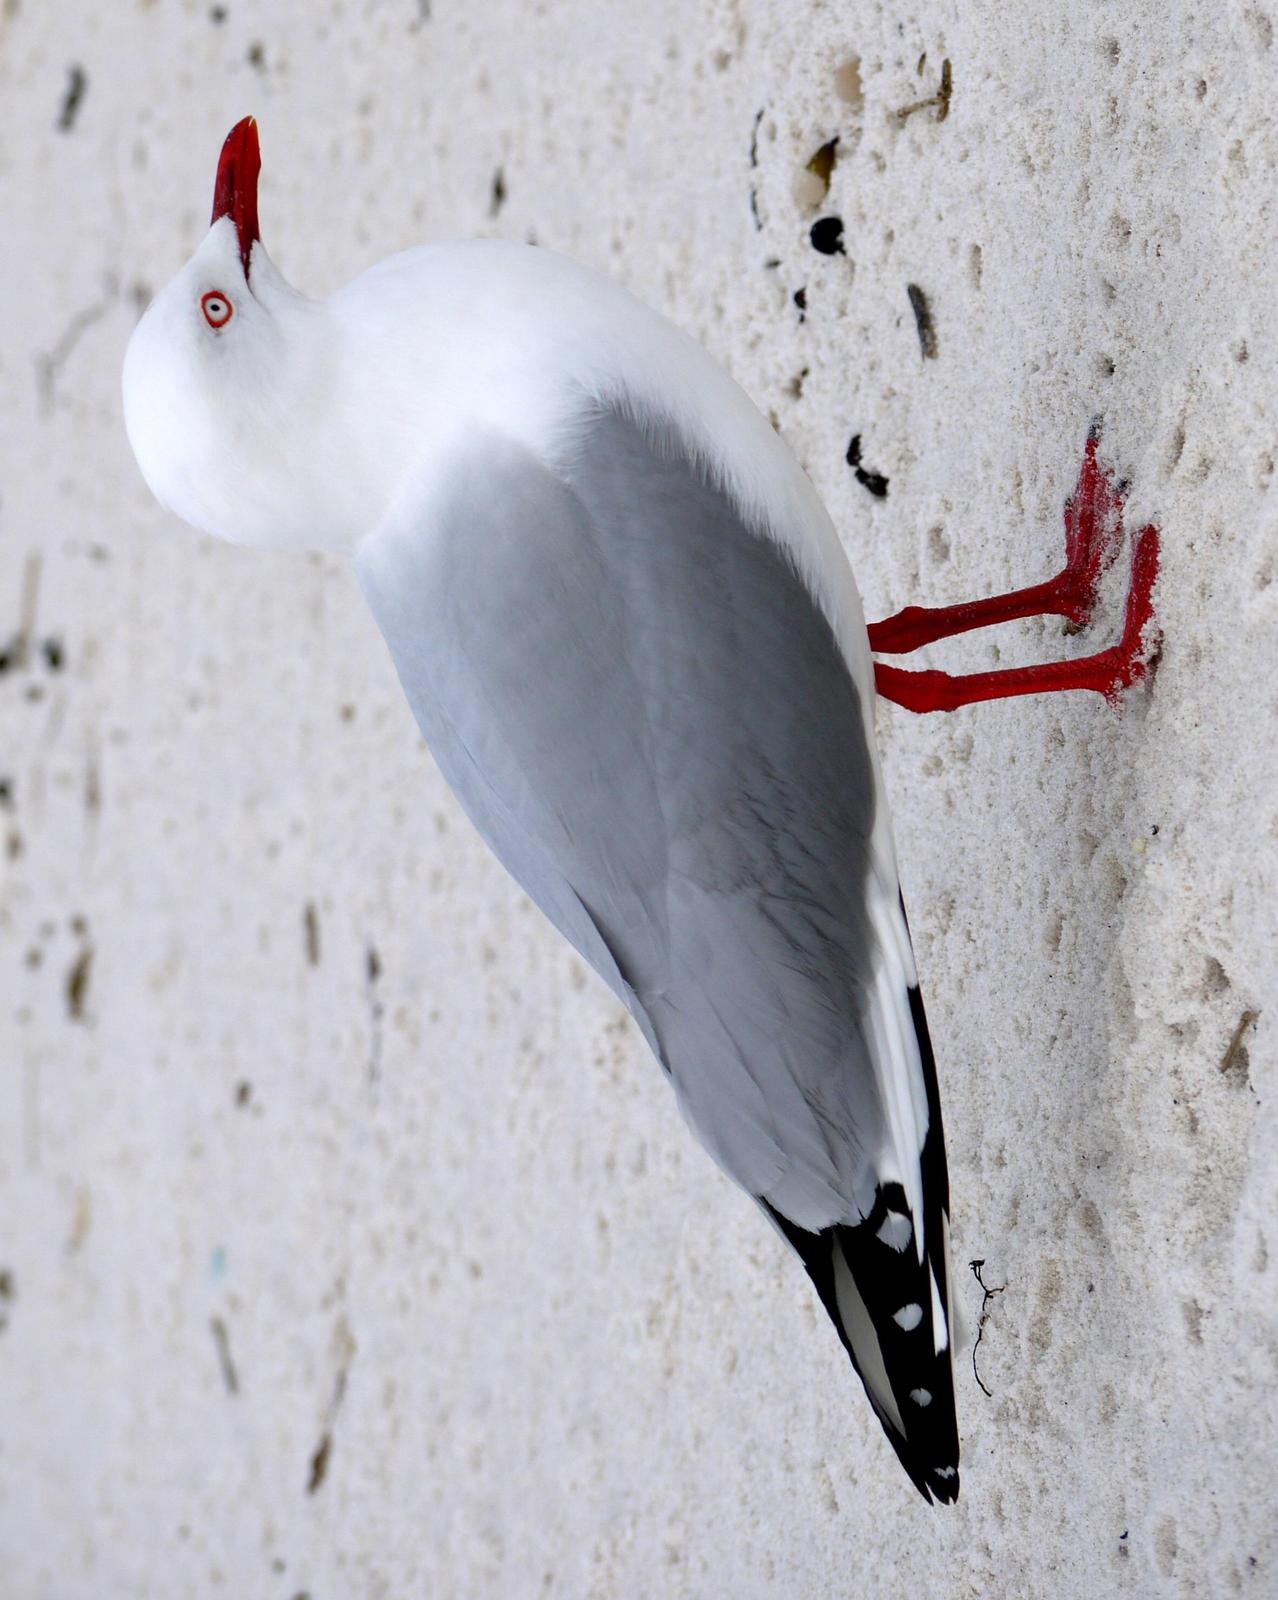 Silver Gull (Silver) Photo by Peter Lowe